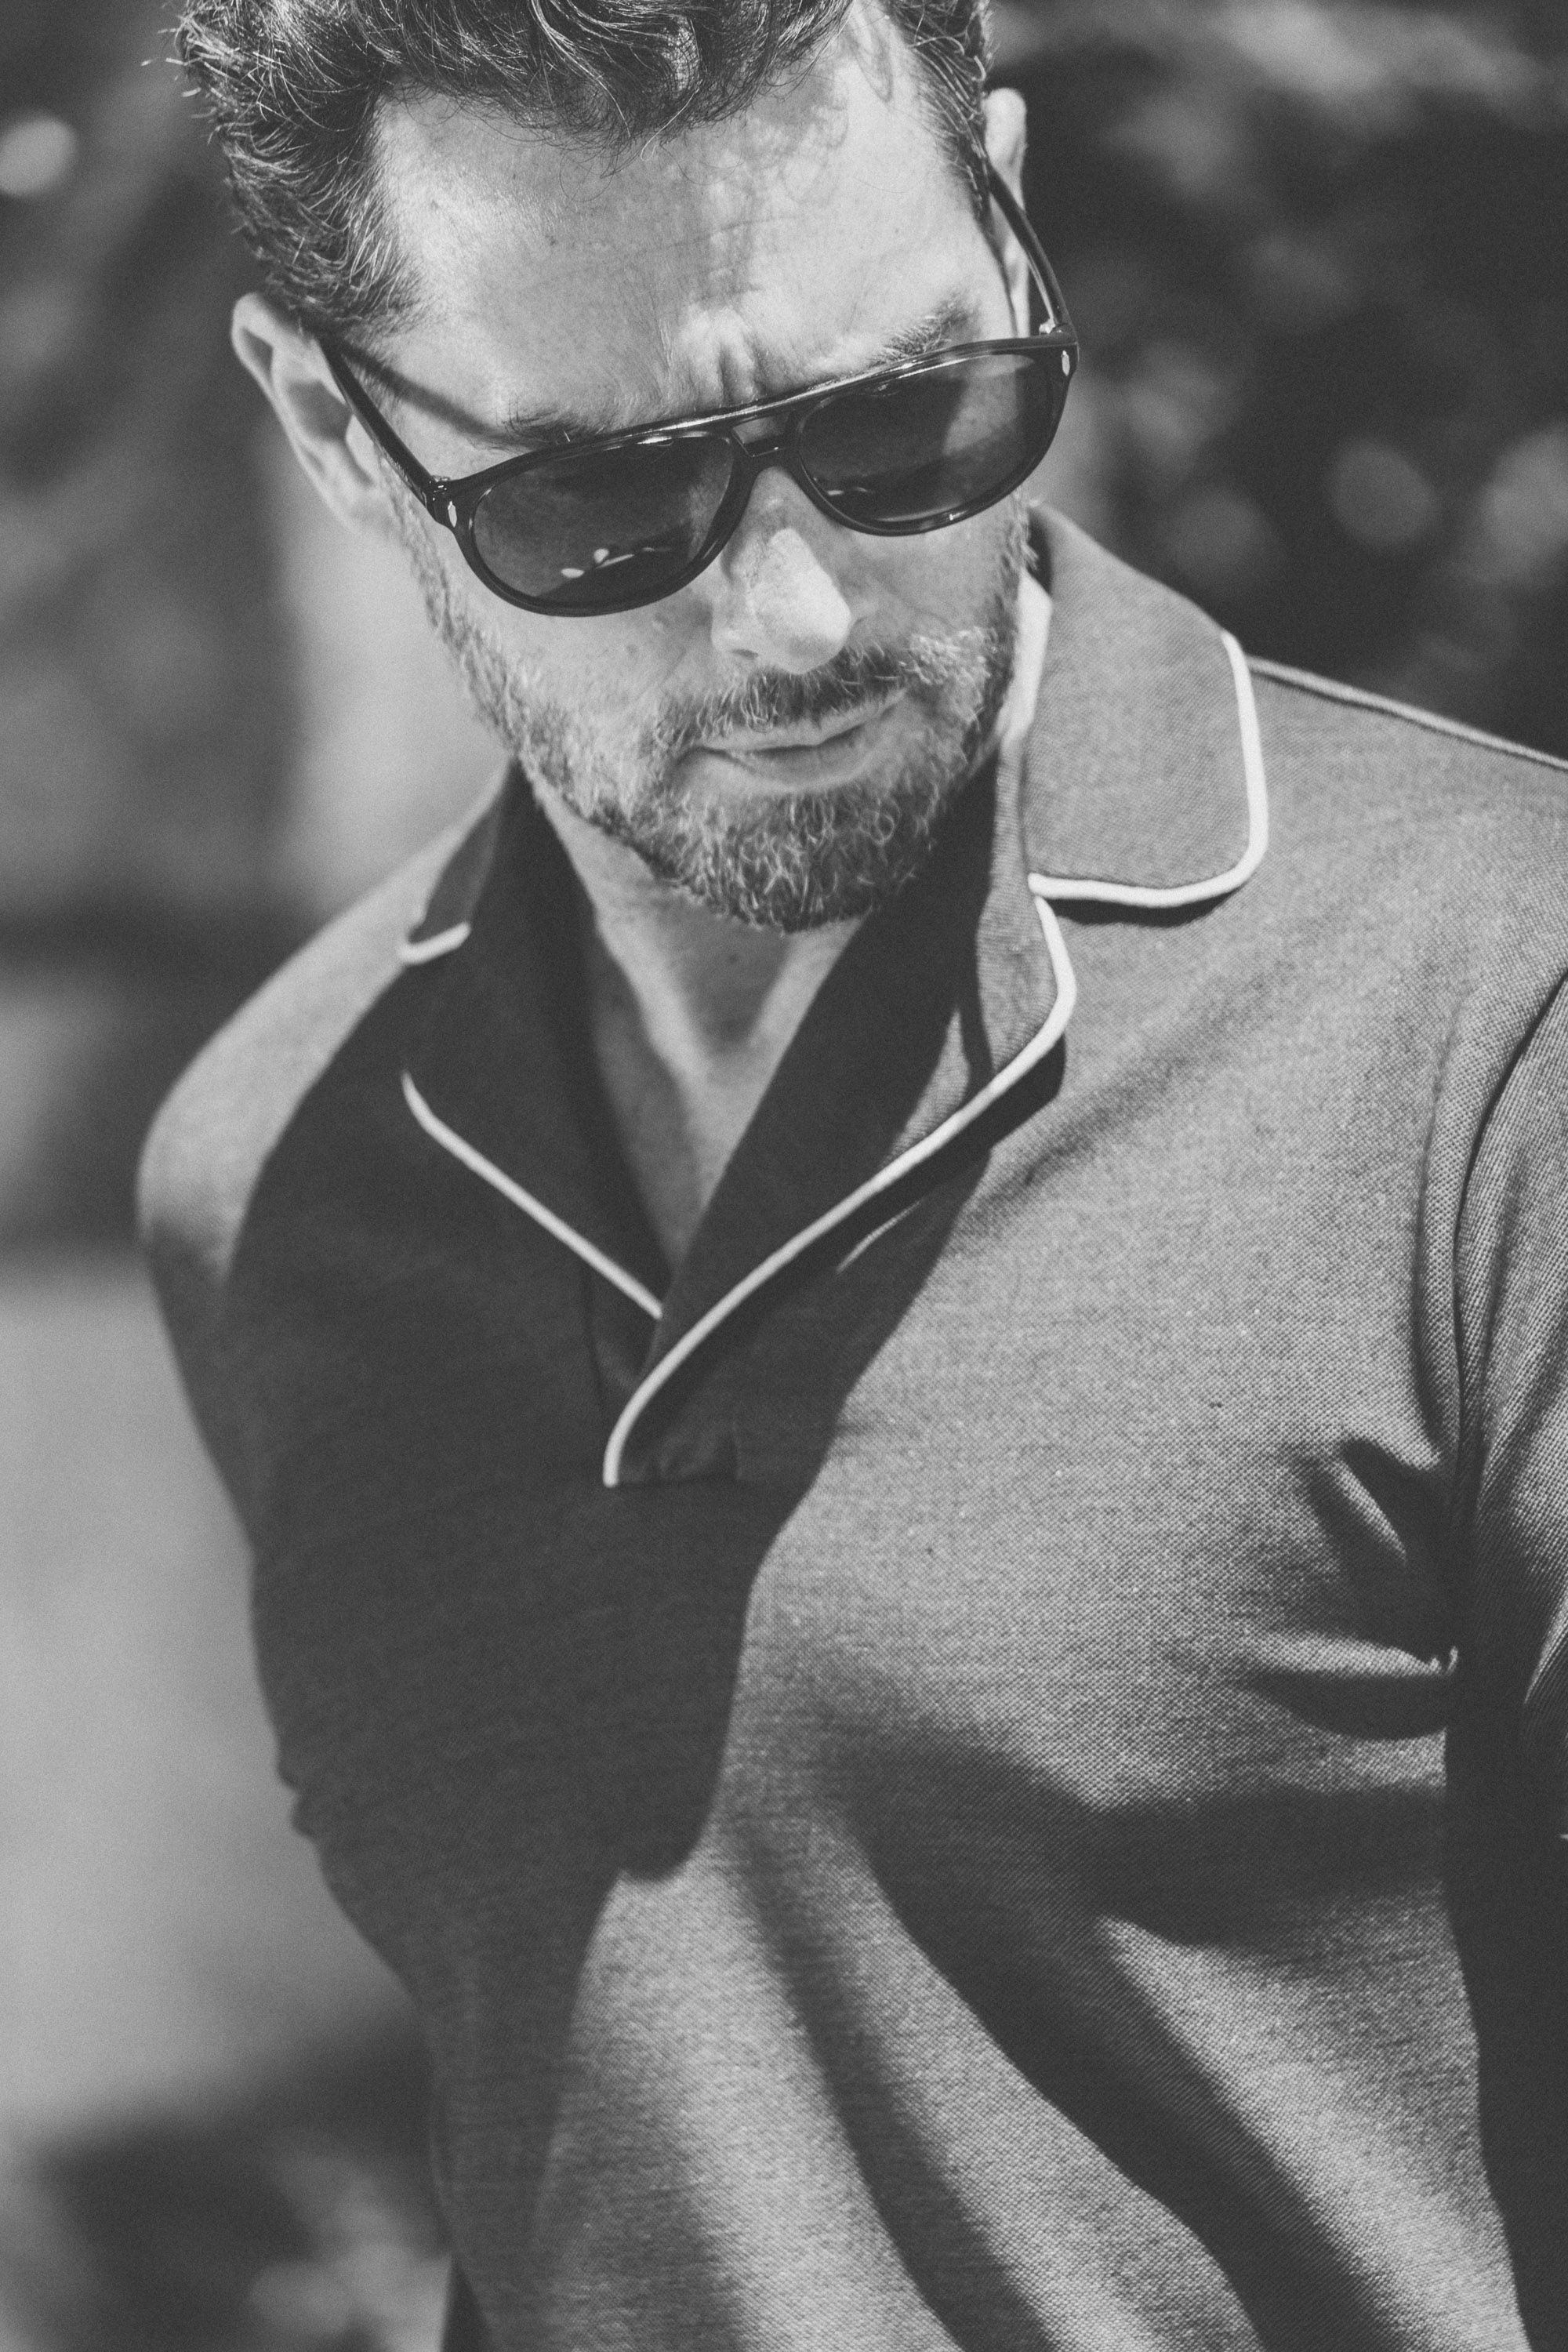 Man elegant and cool wearing sunglasses and polo shirt in retro design